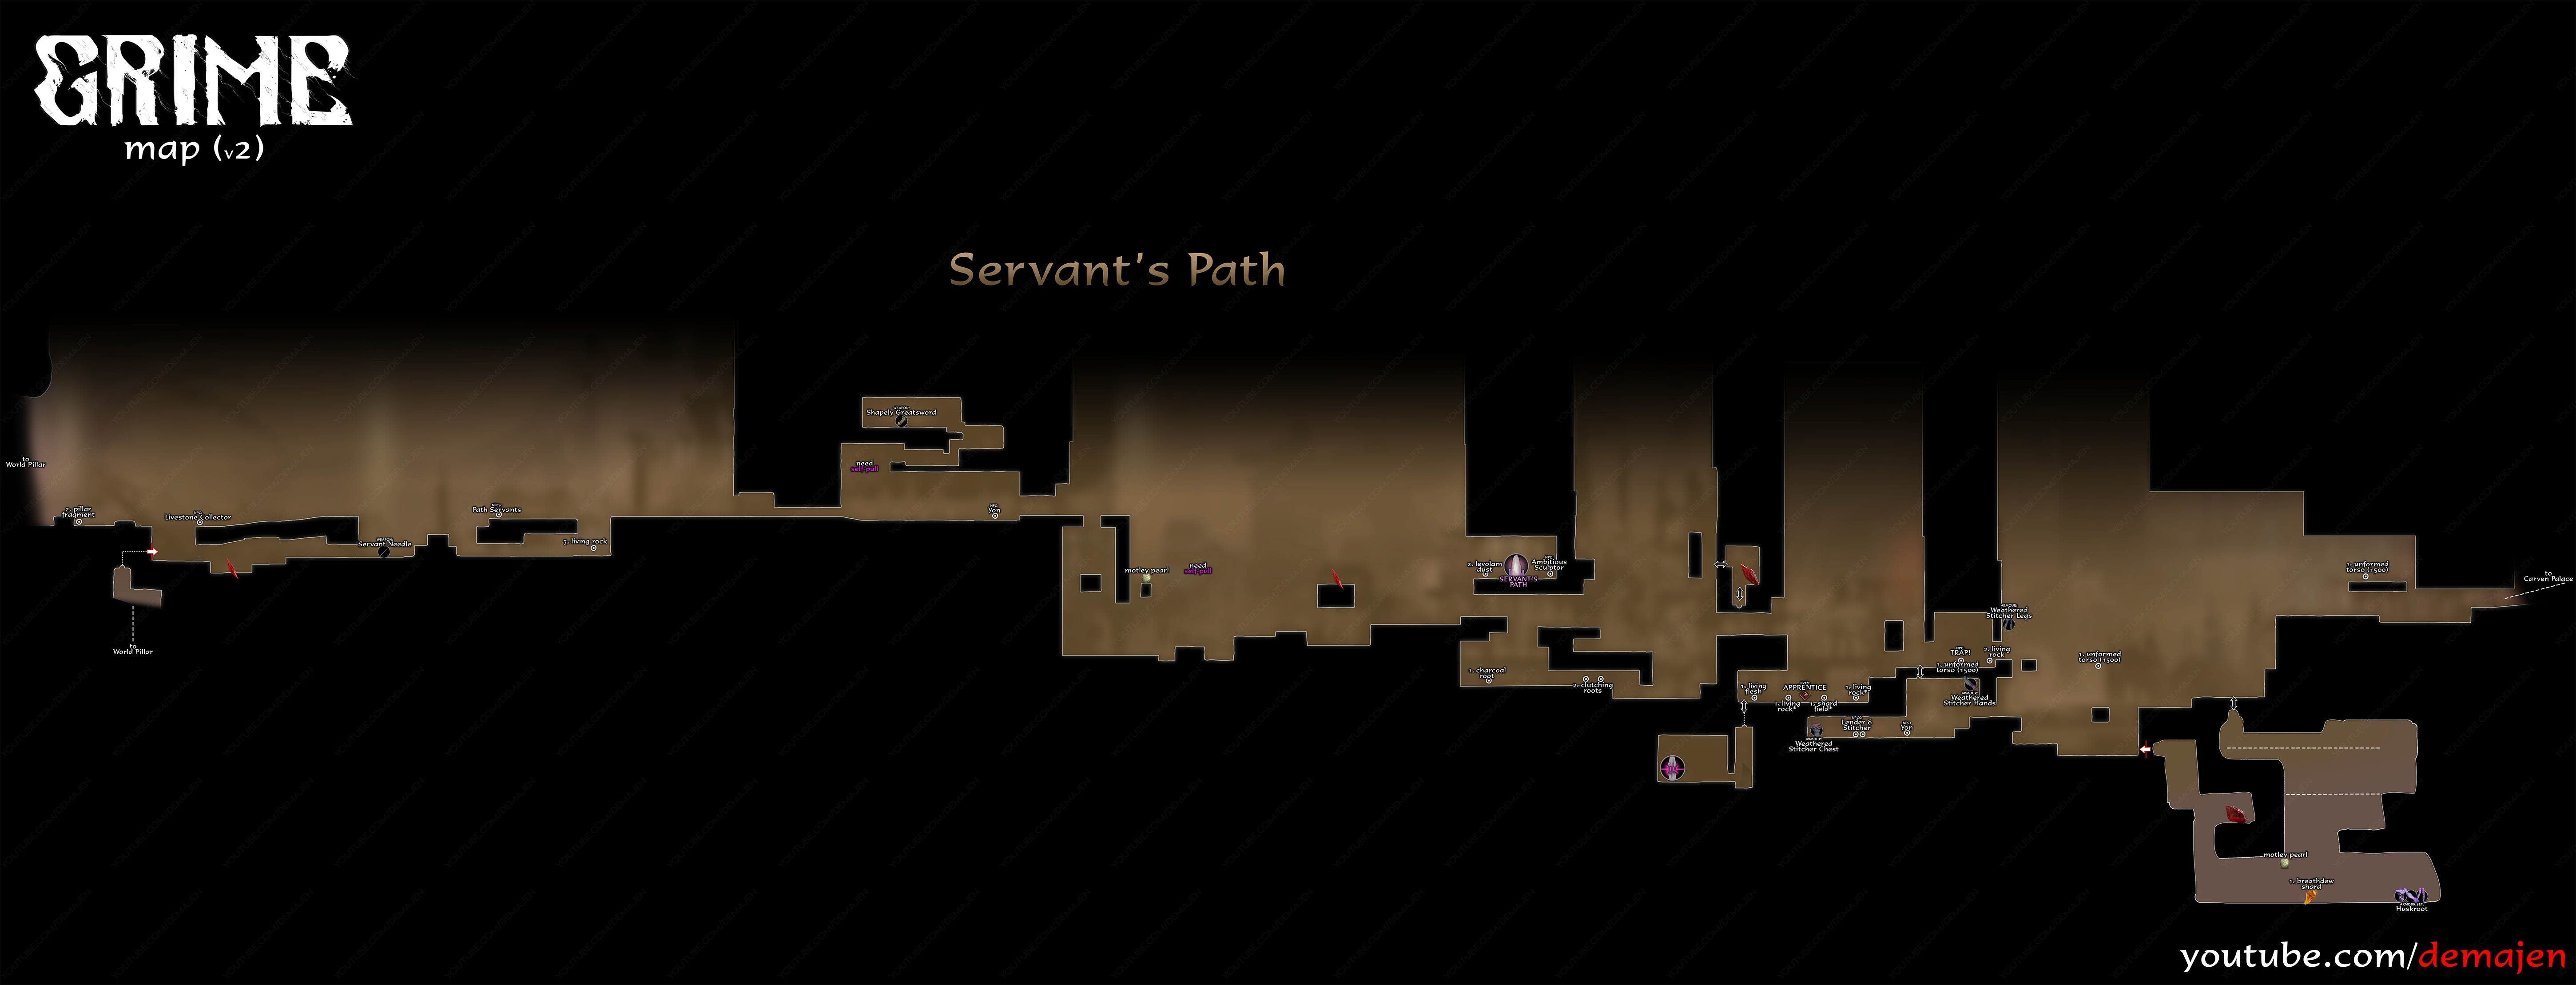 GRIME - All Maps in Game + All Checkpoint Locations - Servant's Path